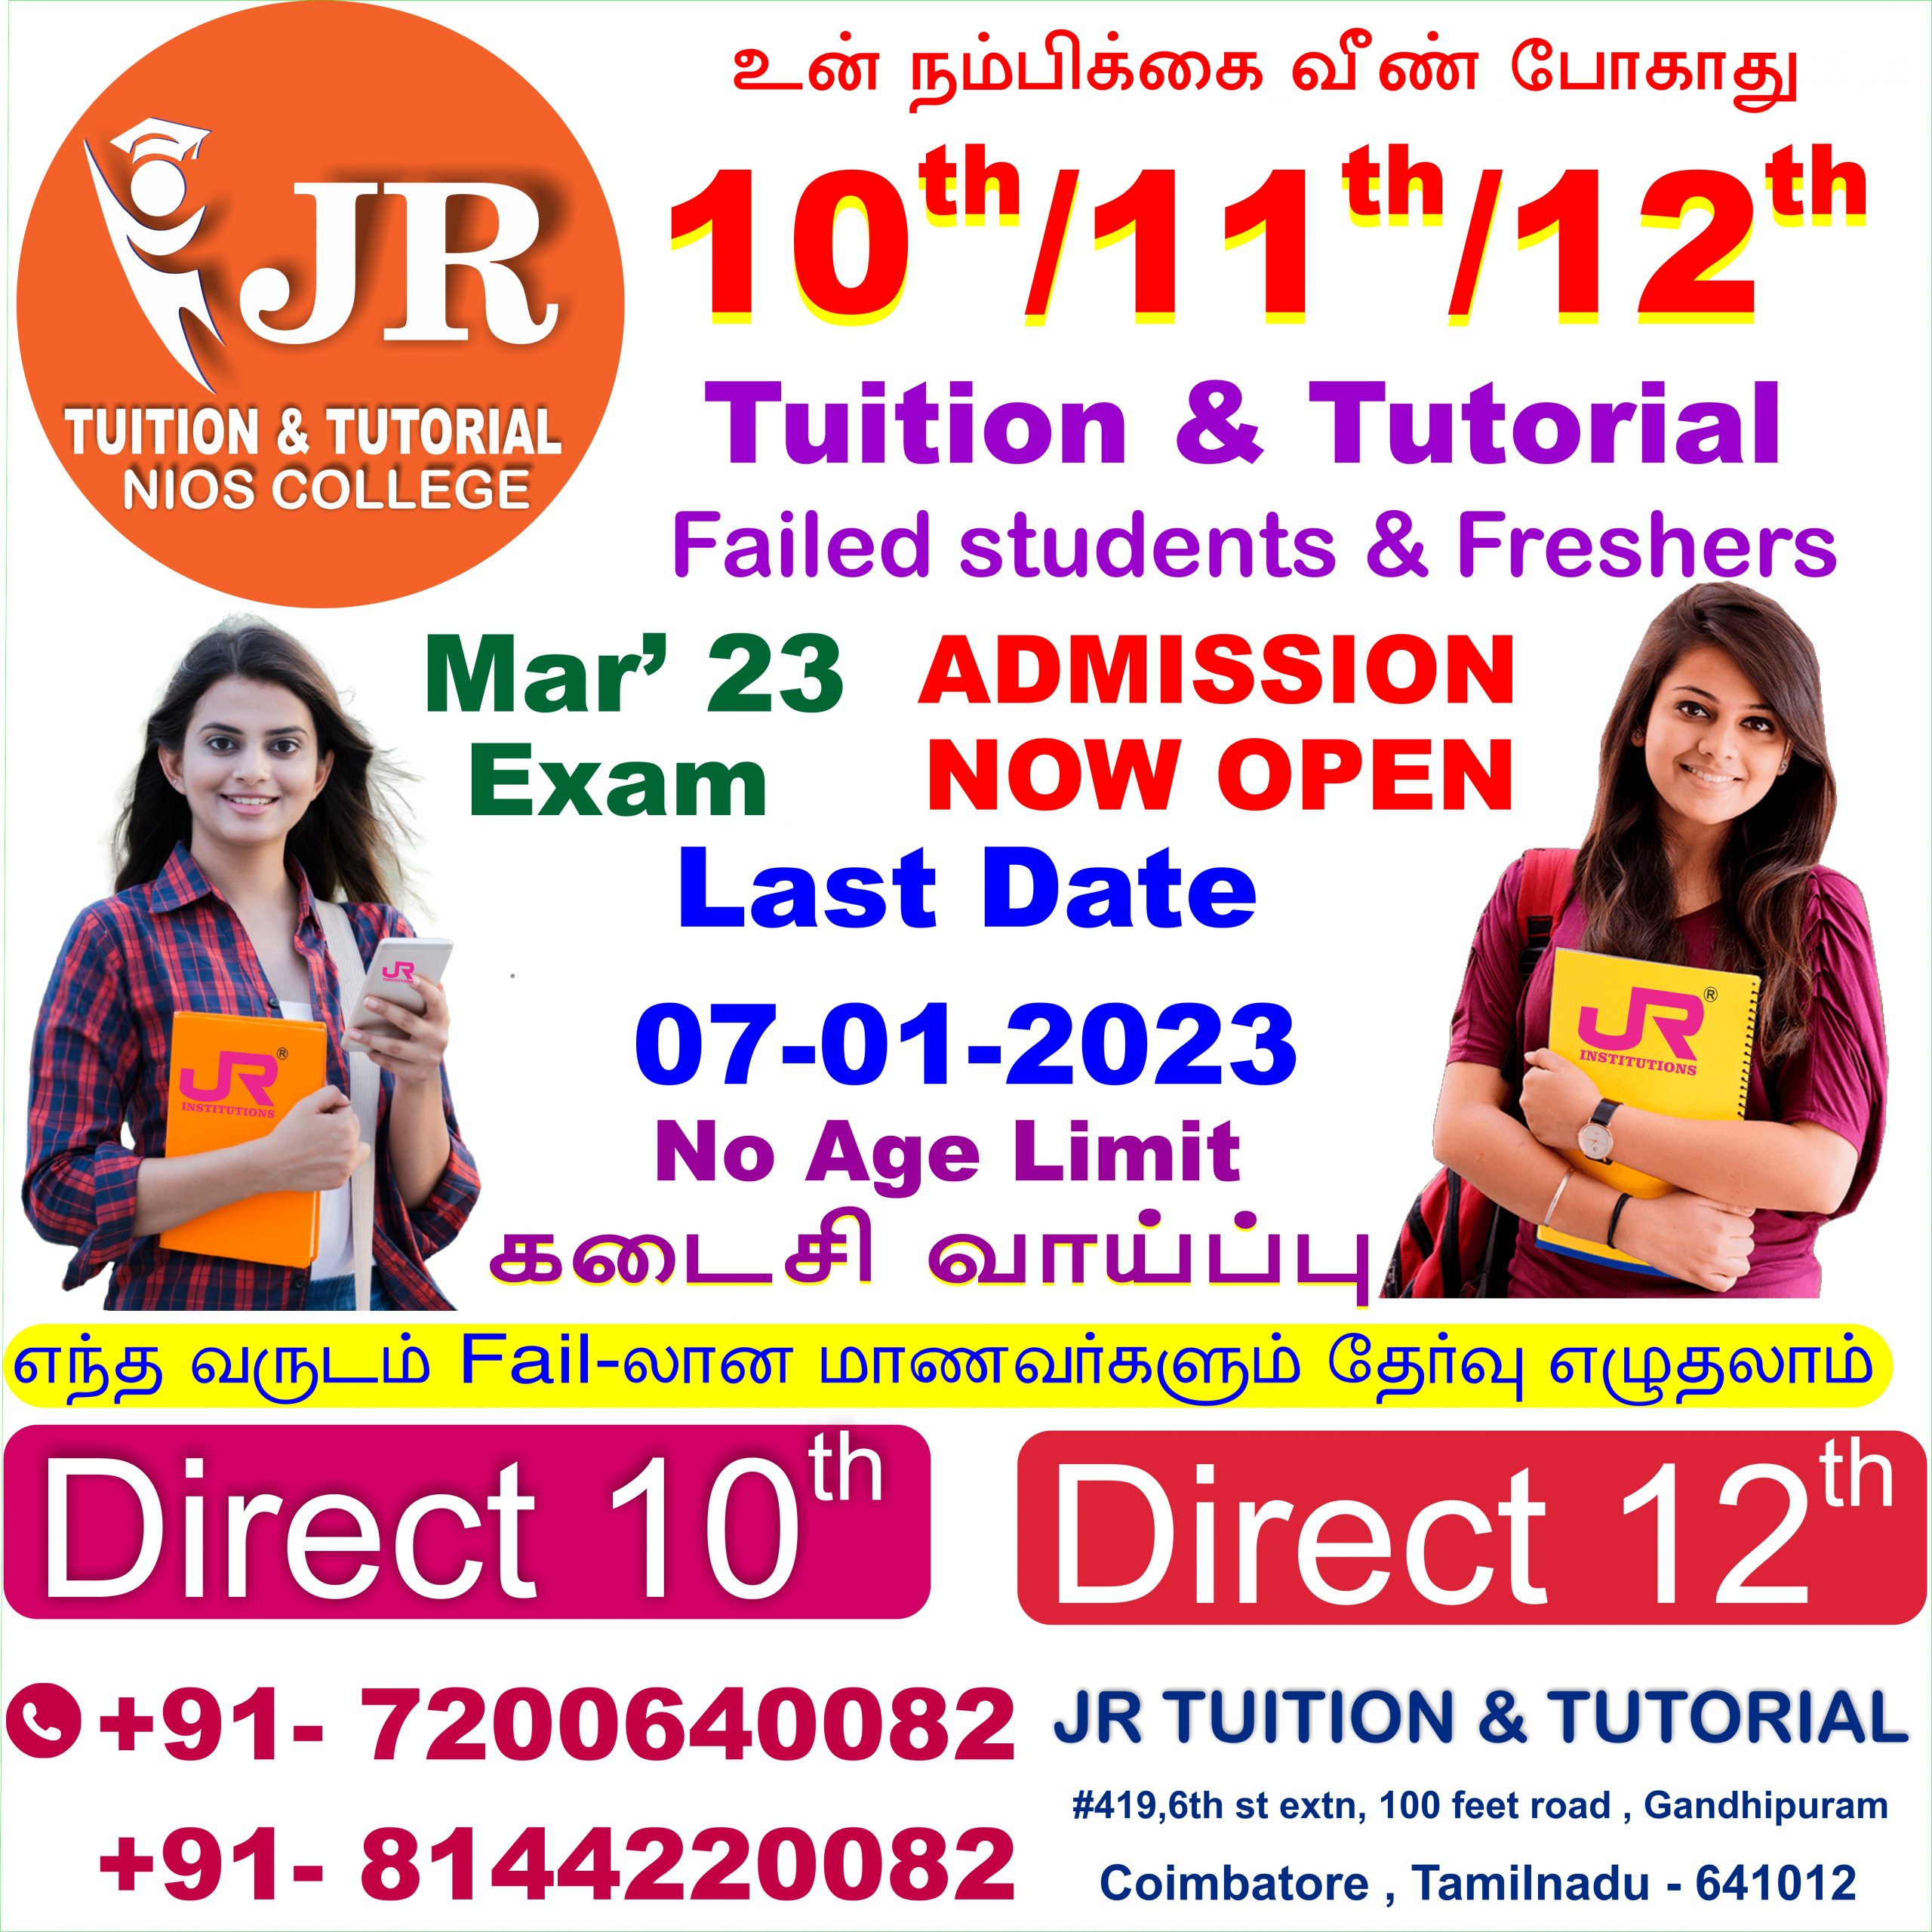 NO.1 best tutorial college and tuition centre in coimbatore